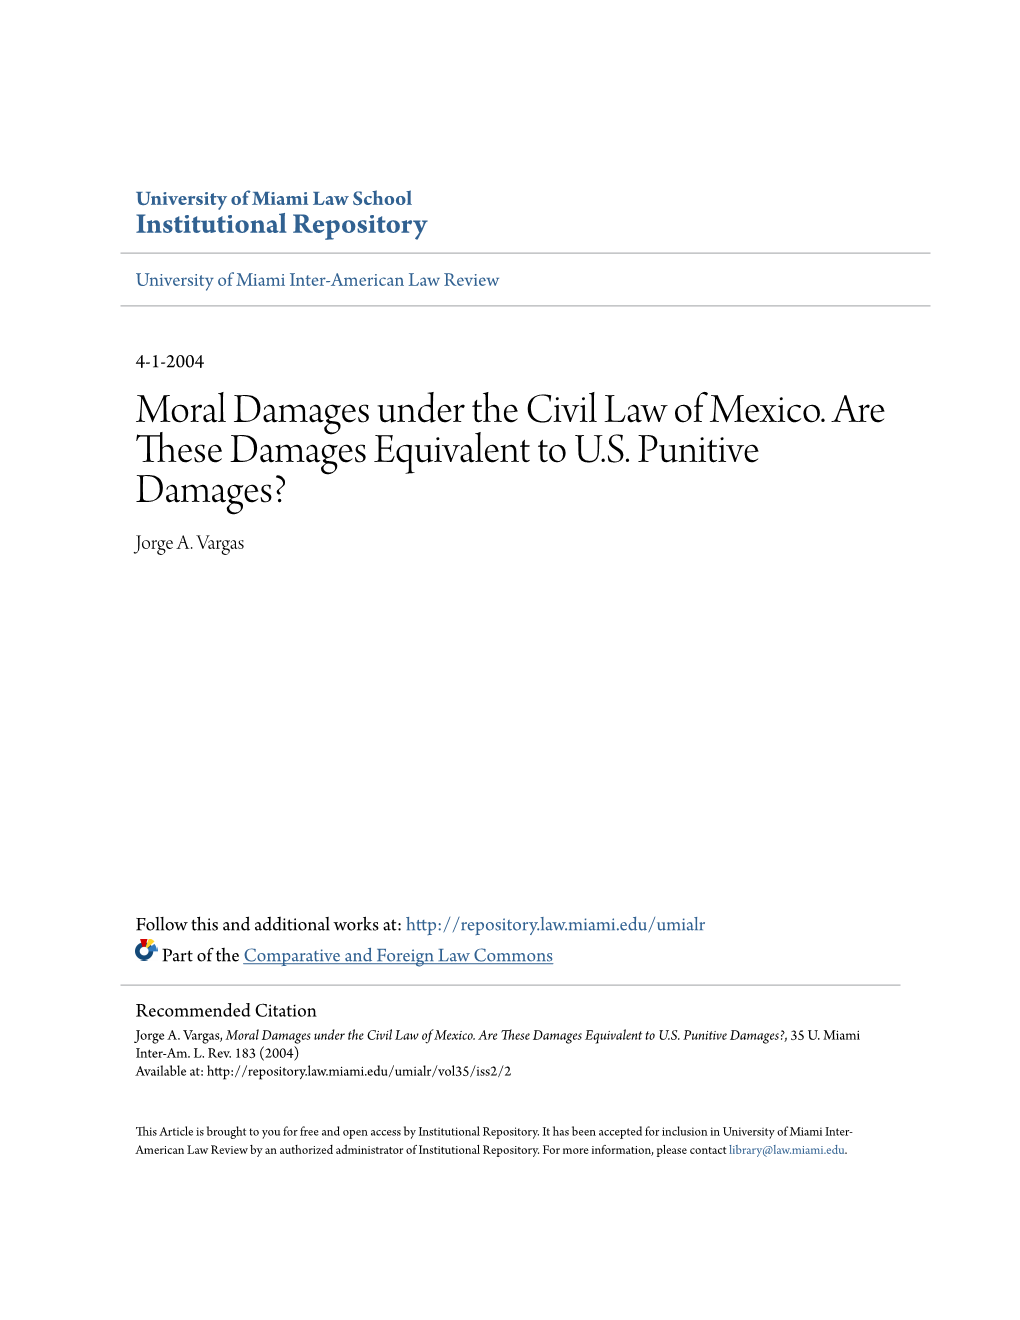 Moral Damages Under the Civil Law of Mexico. Are These Damages Equivalent to U.S